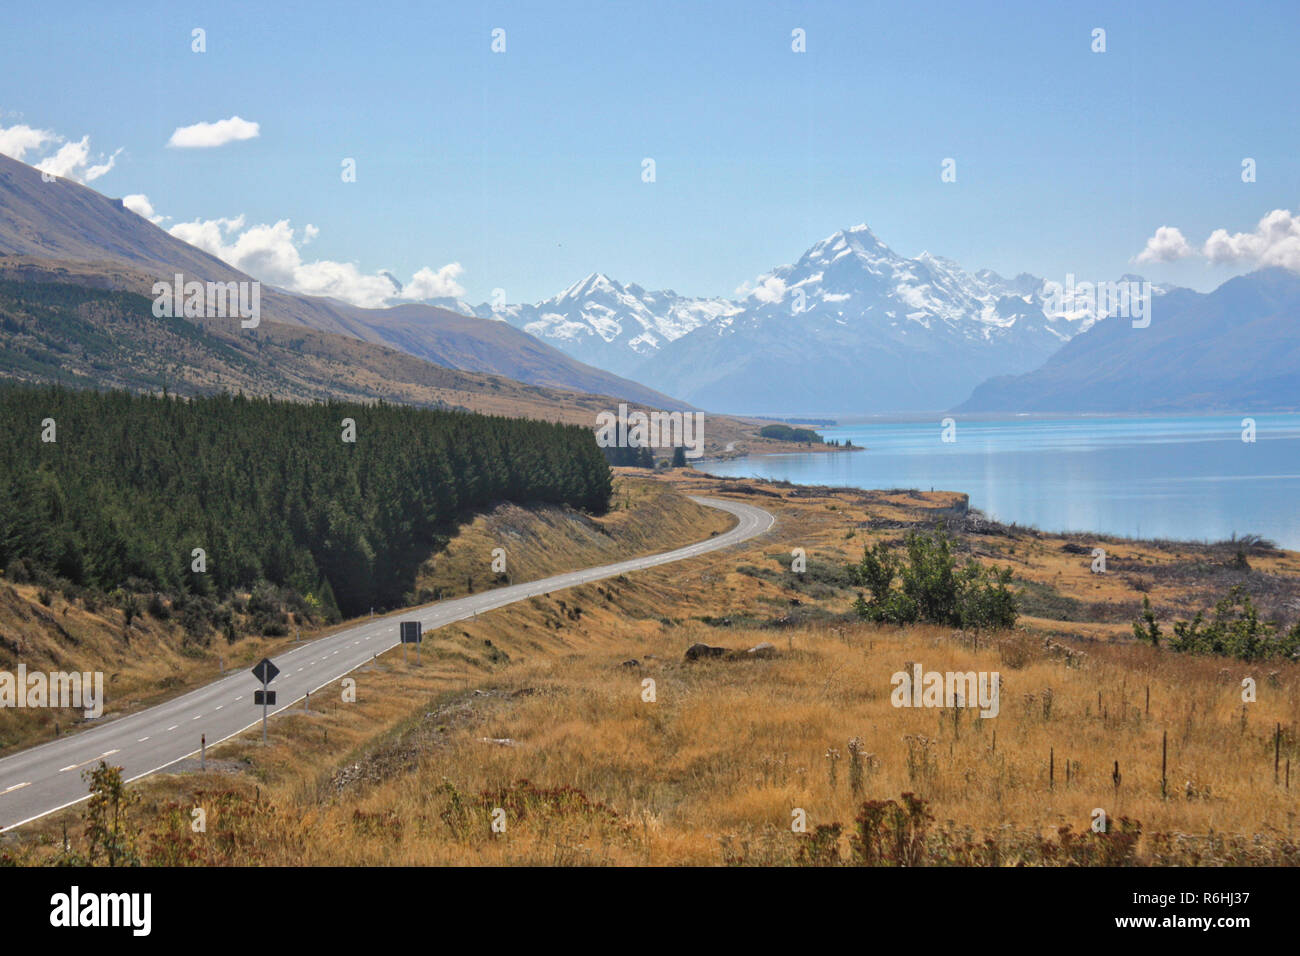 Winding road by a lake leading to Aoraki / Mt Cook in New Zealand. Stock Photo